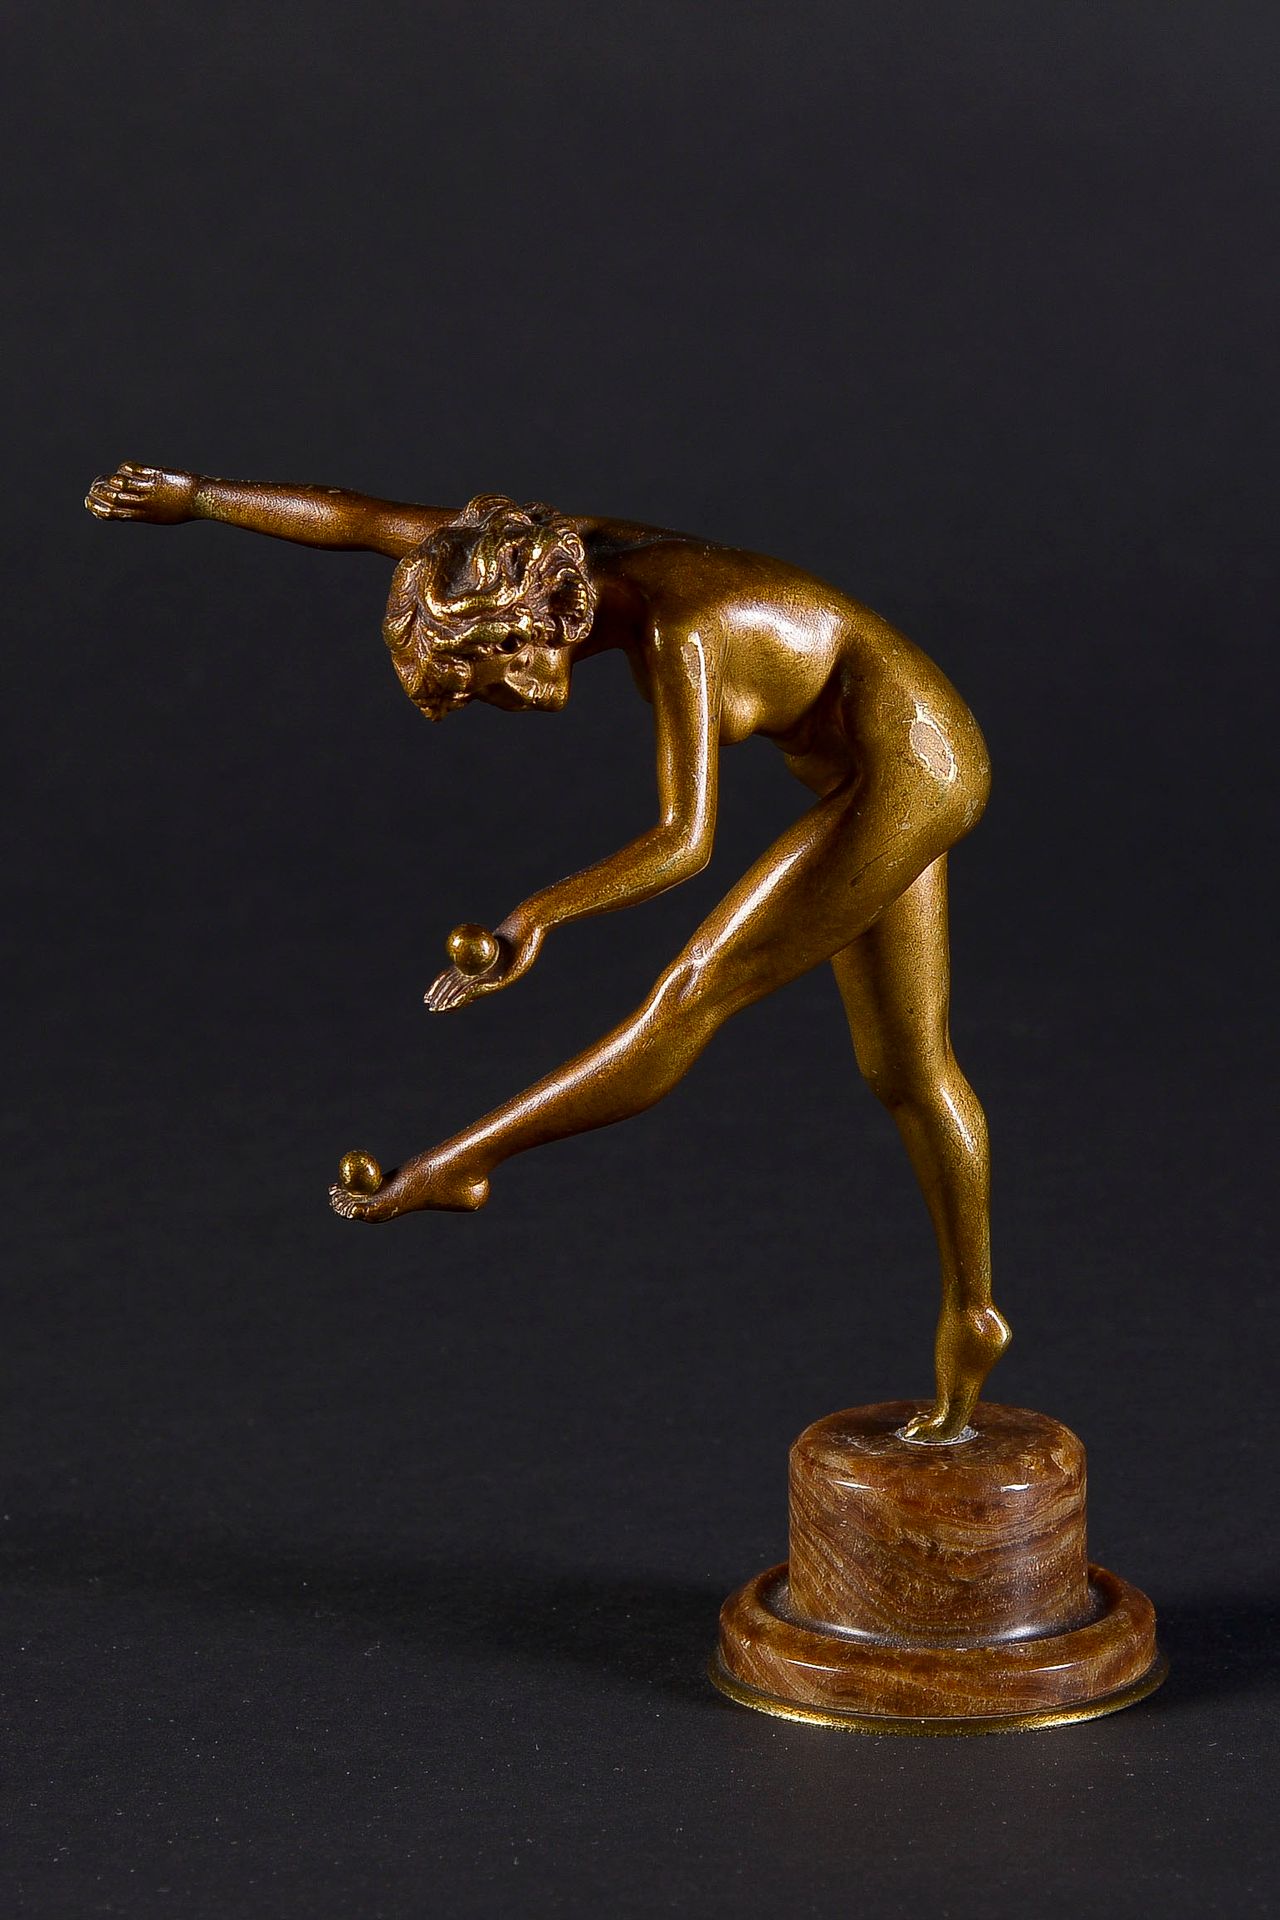 Null After Claire Jeanne COLINET (1880-1950)

Juggler

Proof in bronze with meda&hellip;